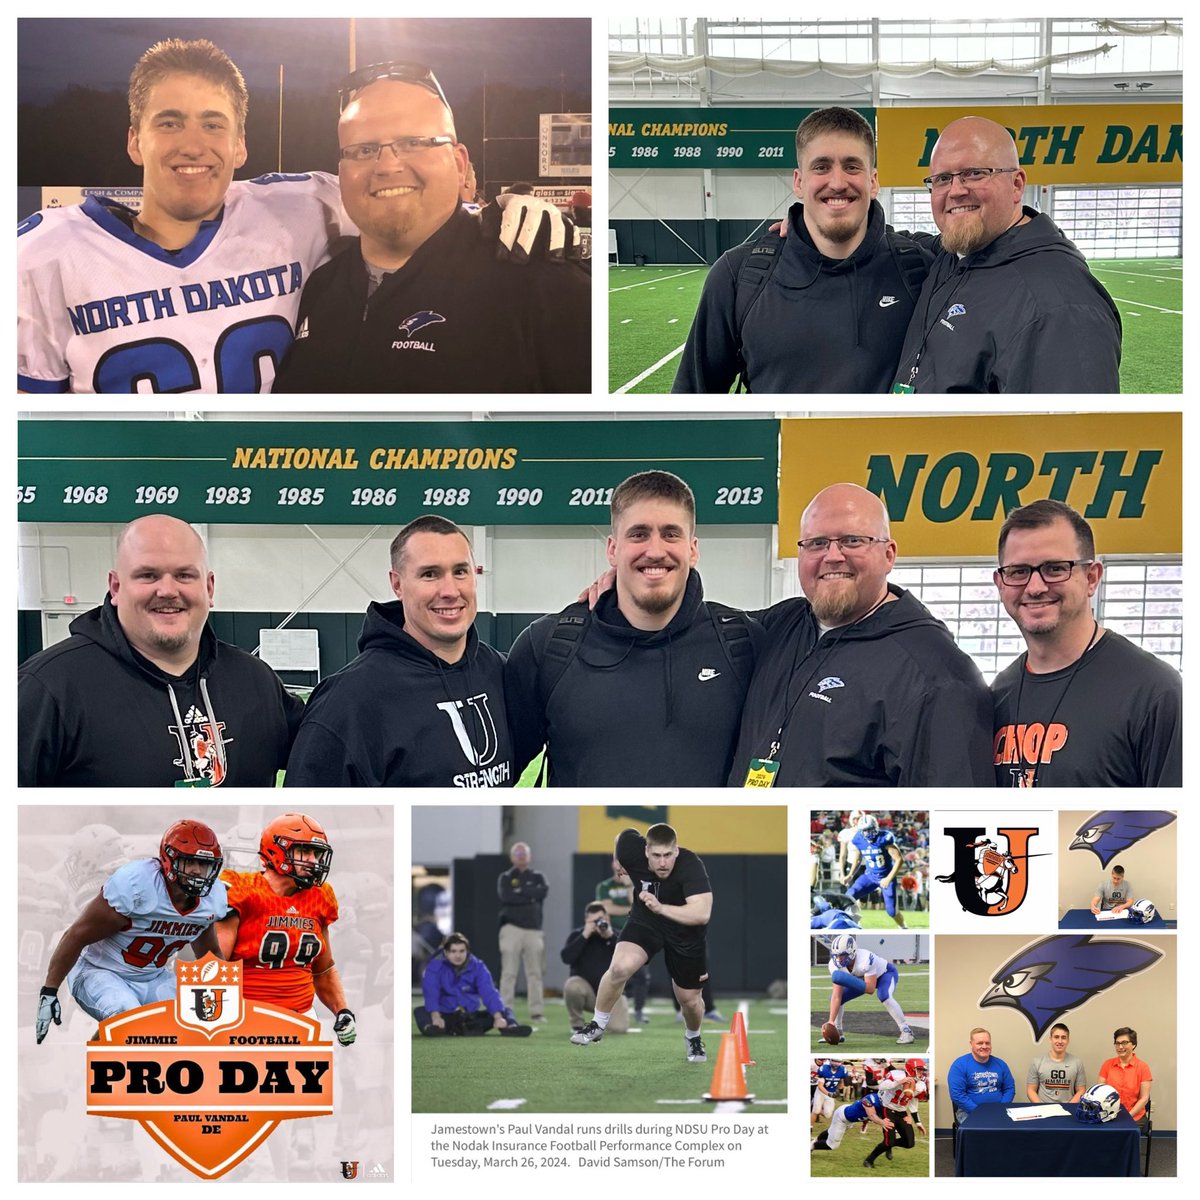 Couldn’t be more proud of @PaulVandal4, Blue Jay grad, @JimmieFootball grad, competing in Pro Day at NDSU. Opening eyes, head down, working hard. Come a long ways, keep GOING!! Thankful to be part of the journey!! ❤️❤️#🤙🏼JAYS #BETTER.EVERY.DAY WIT FOE LEO #ChopandCarry